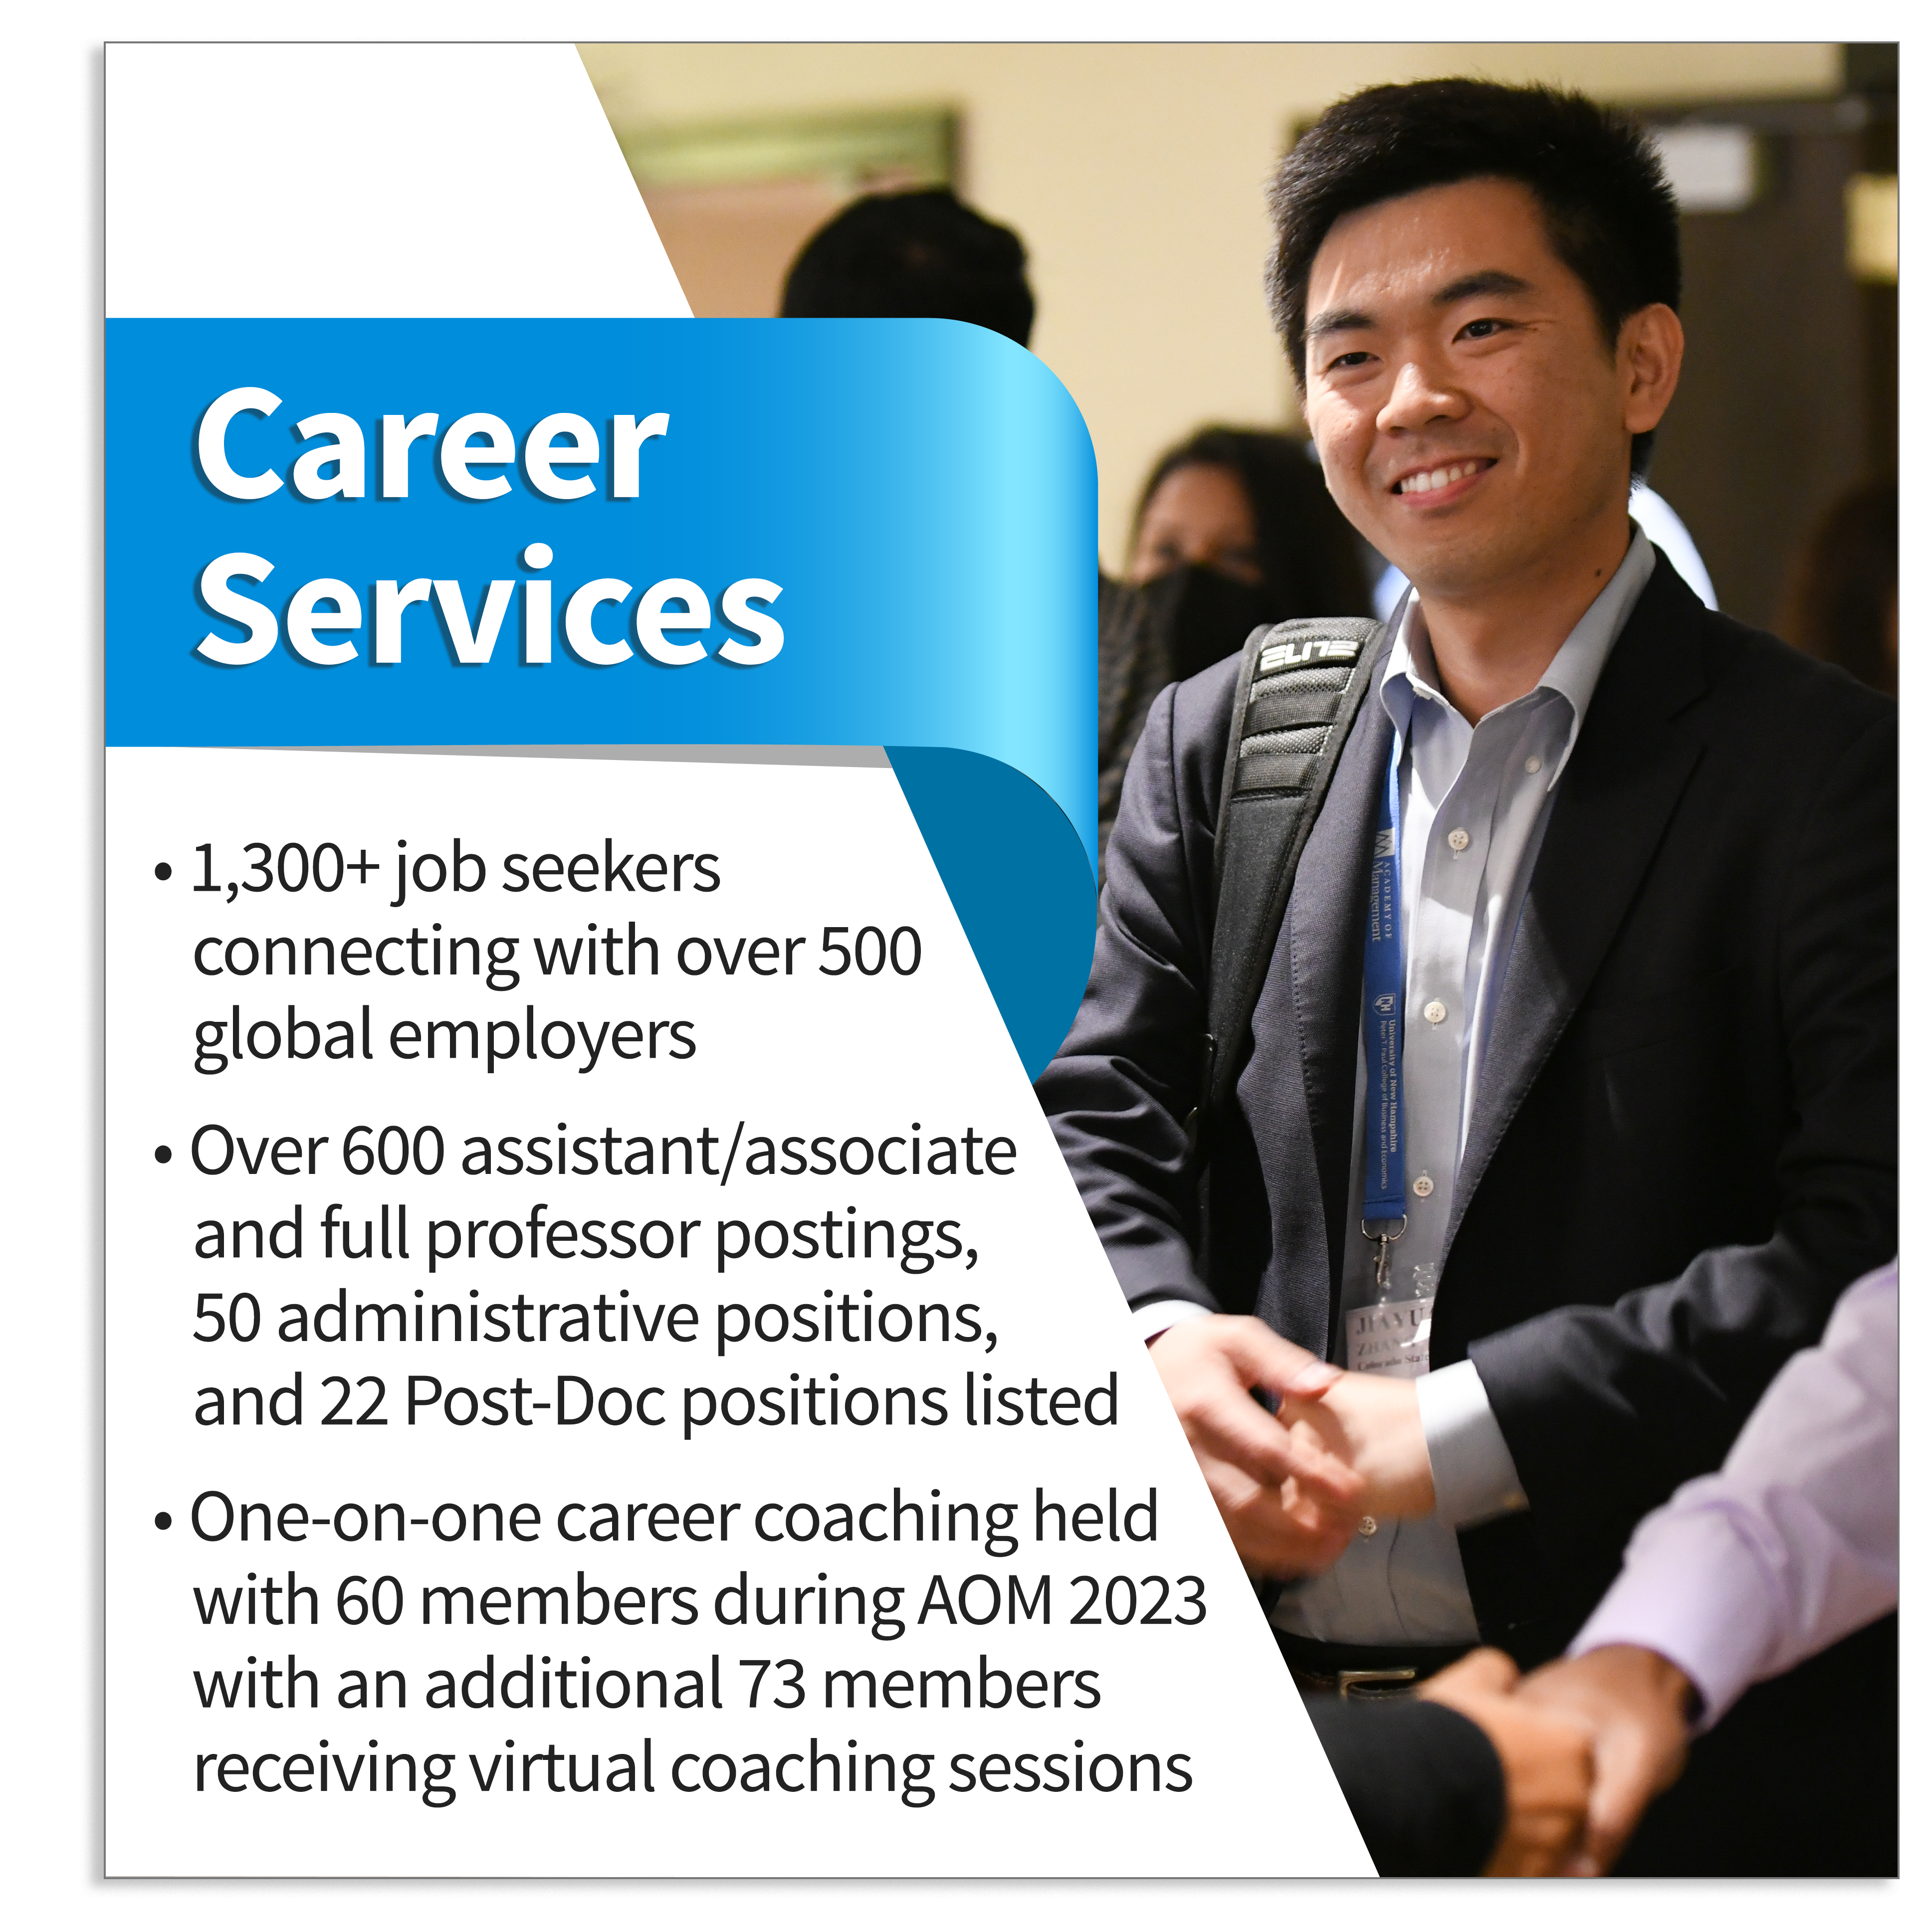 AOM Career Services image with handshake